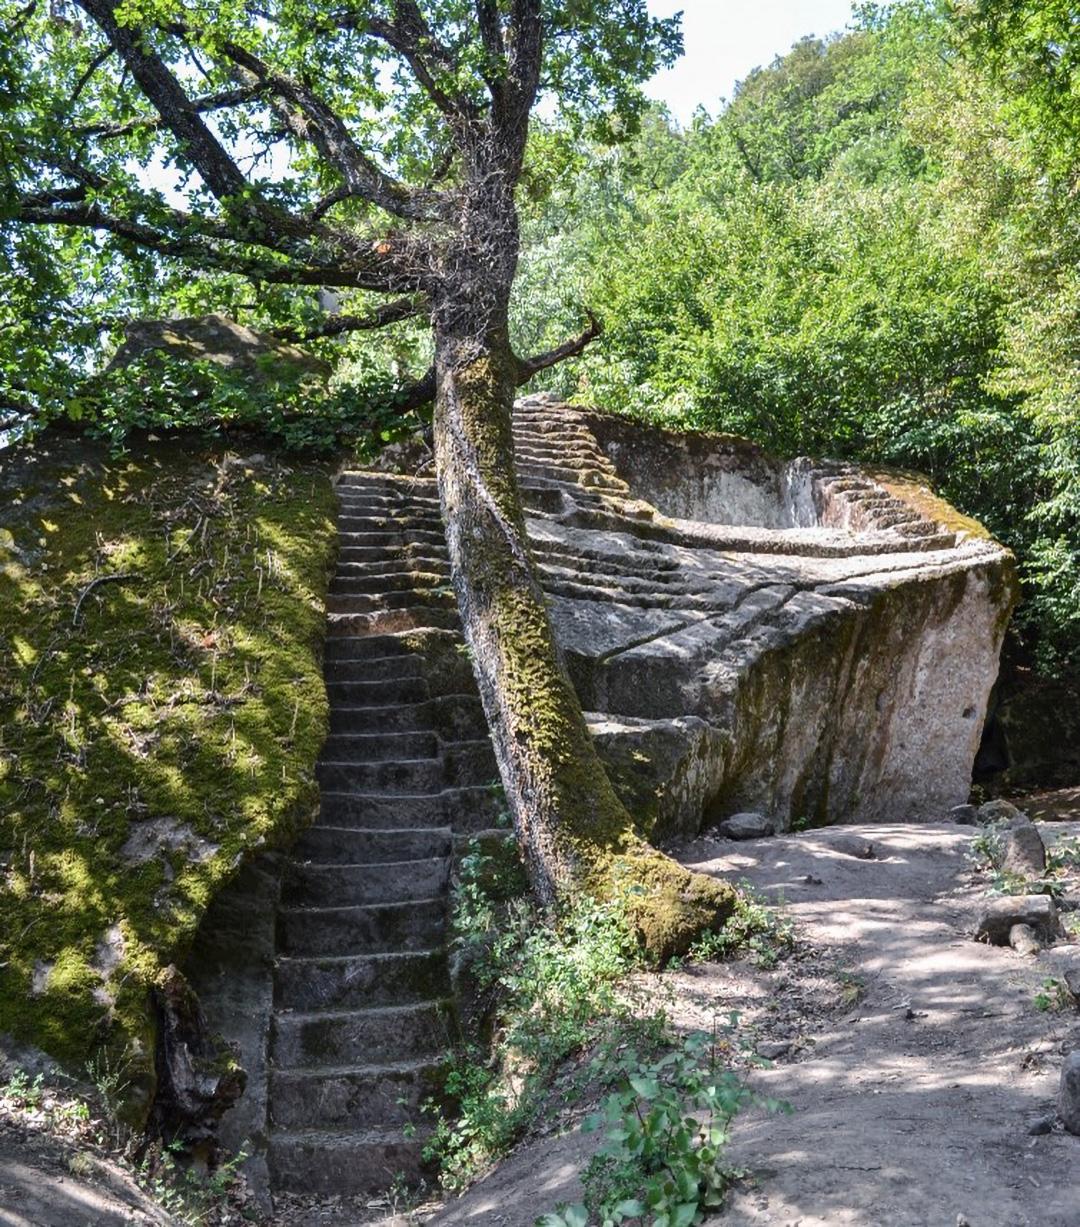 winding stone stairs surrounded by lush trees and bushes